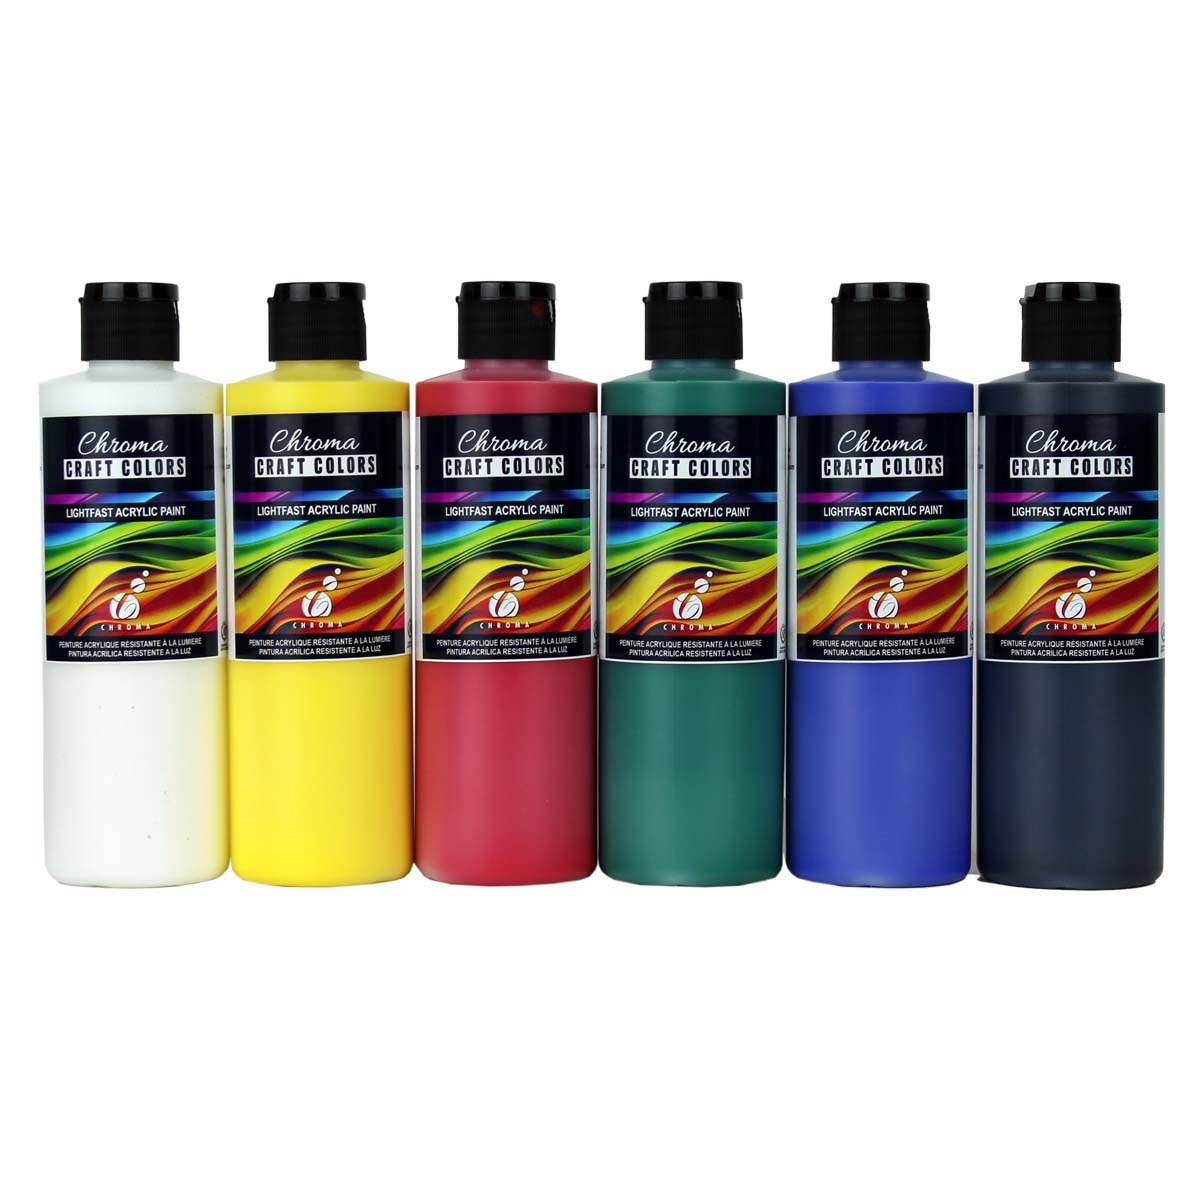 Ras Tempera Paint for Kids Set of 12 2 oz. Bottles - Assorted Colors